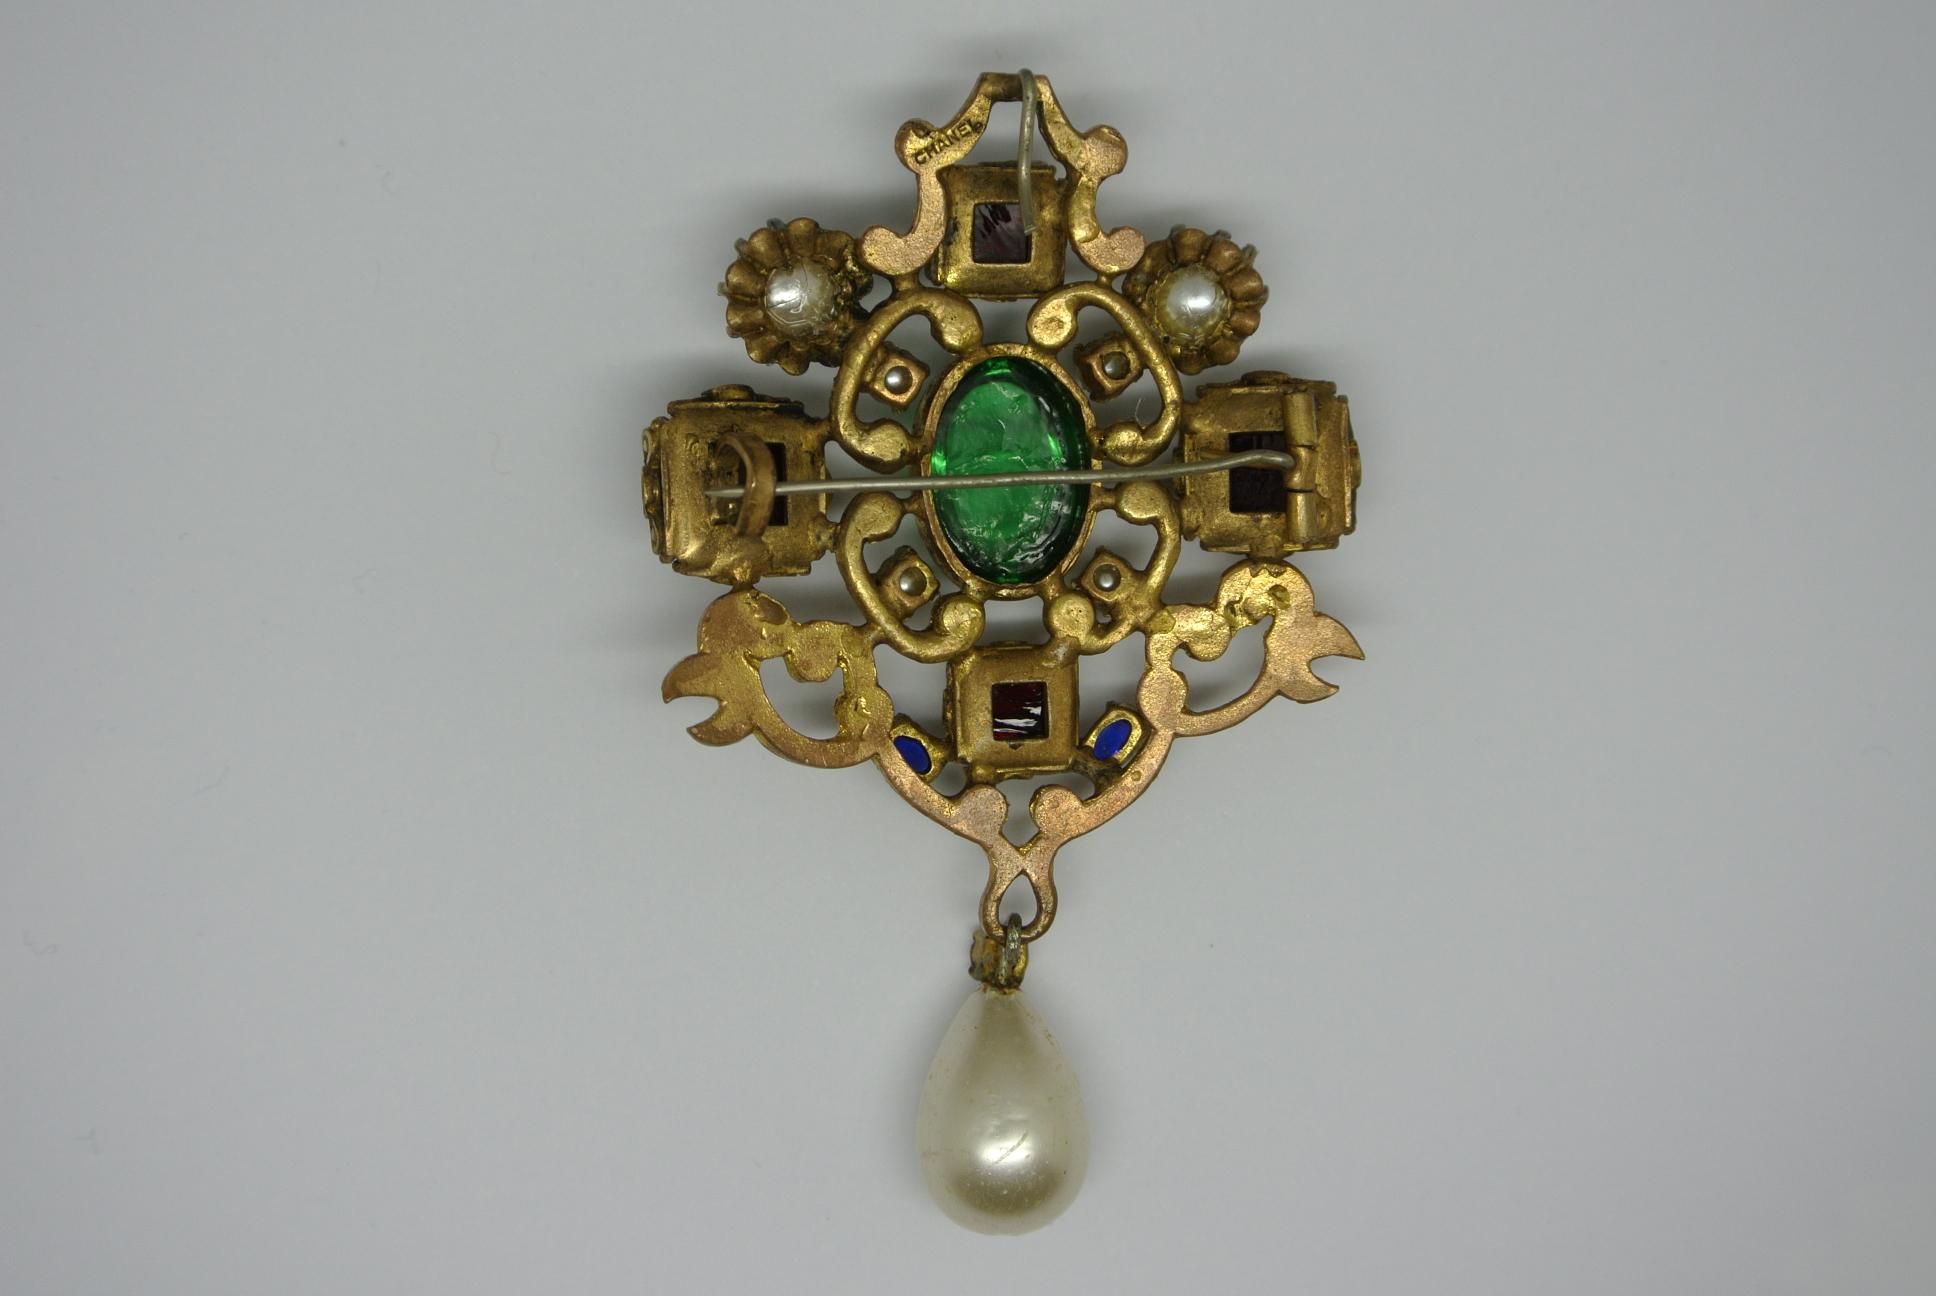 A museum quality Chanel brooch, in a byzantine style.  
Comes with classic red and green poured glass,
made by Gripoix workshop.
designed by Robert Goossens

